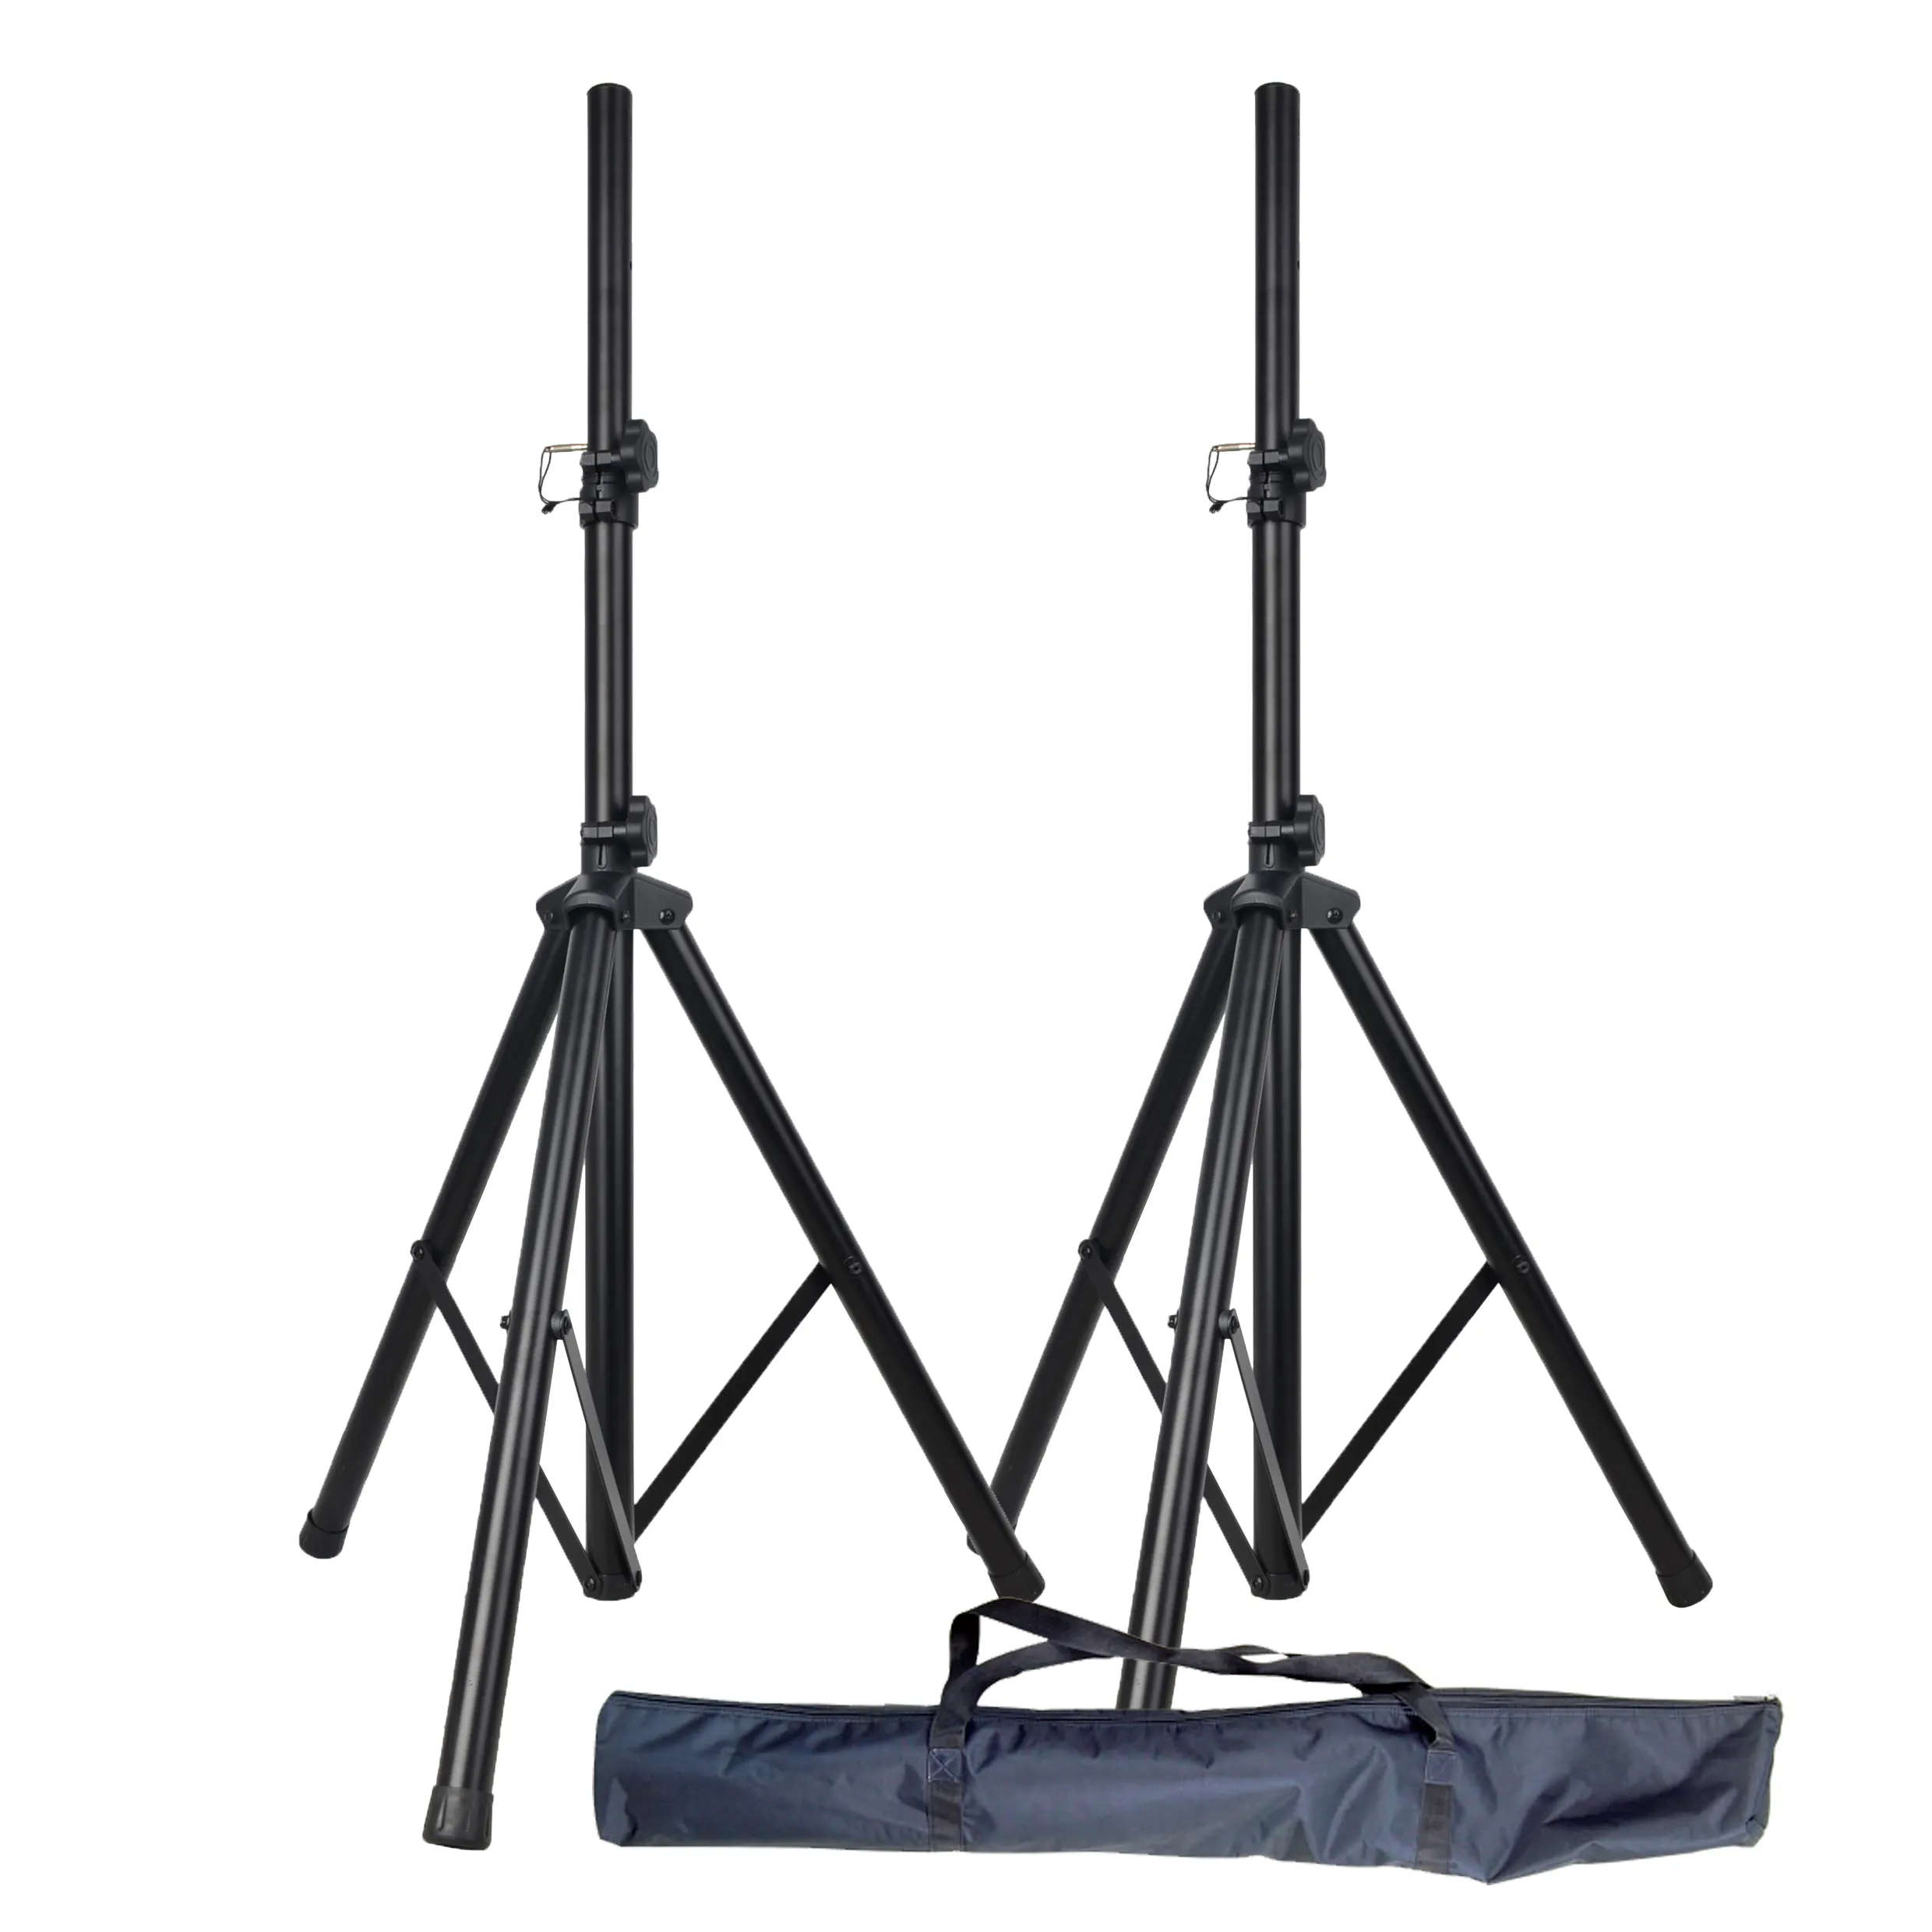 RQSONIC SPS003SL-P-BAG Accuracy Pro Audio Hot Sale Professional Heavy Duty Adjustable Height Tripod Metal Speaker Stand